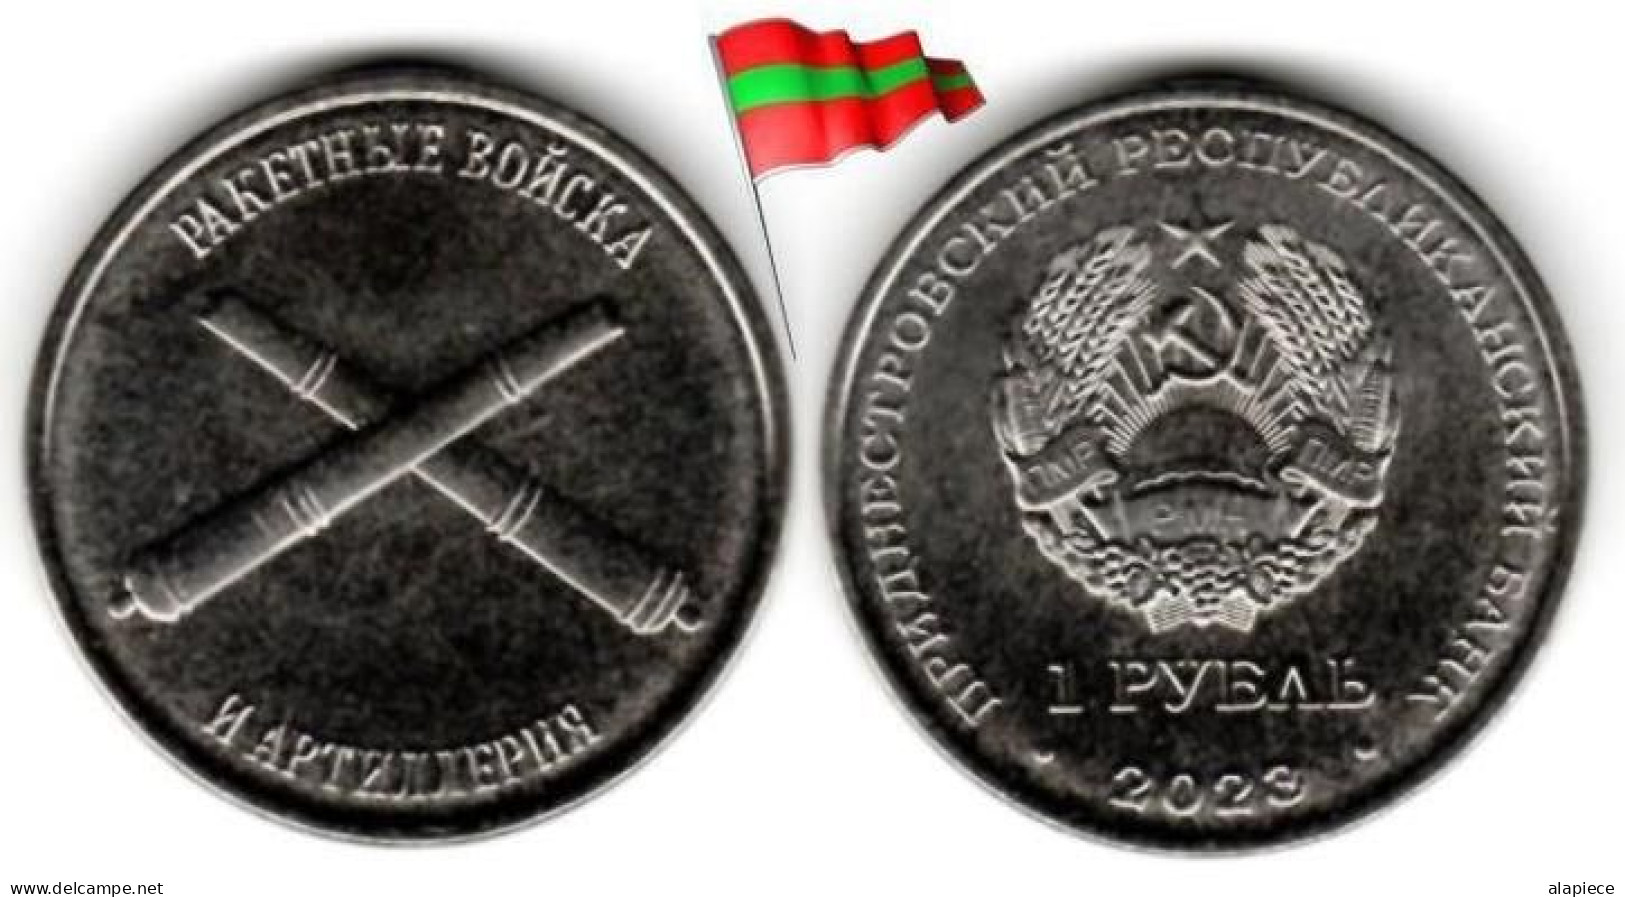 Transnistria - 1 Rouble 2023 (Rocket Forces And Artillery) - Moldavia